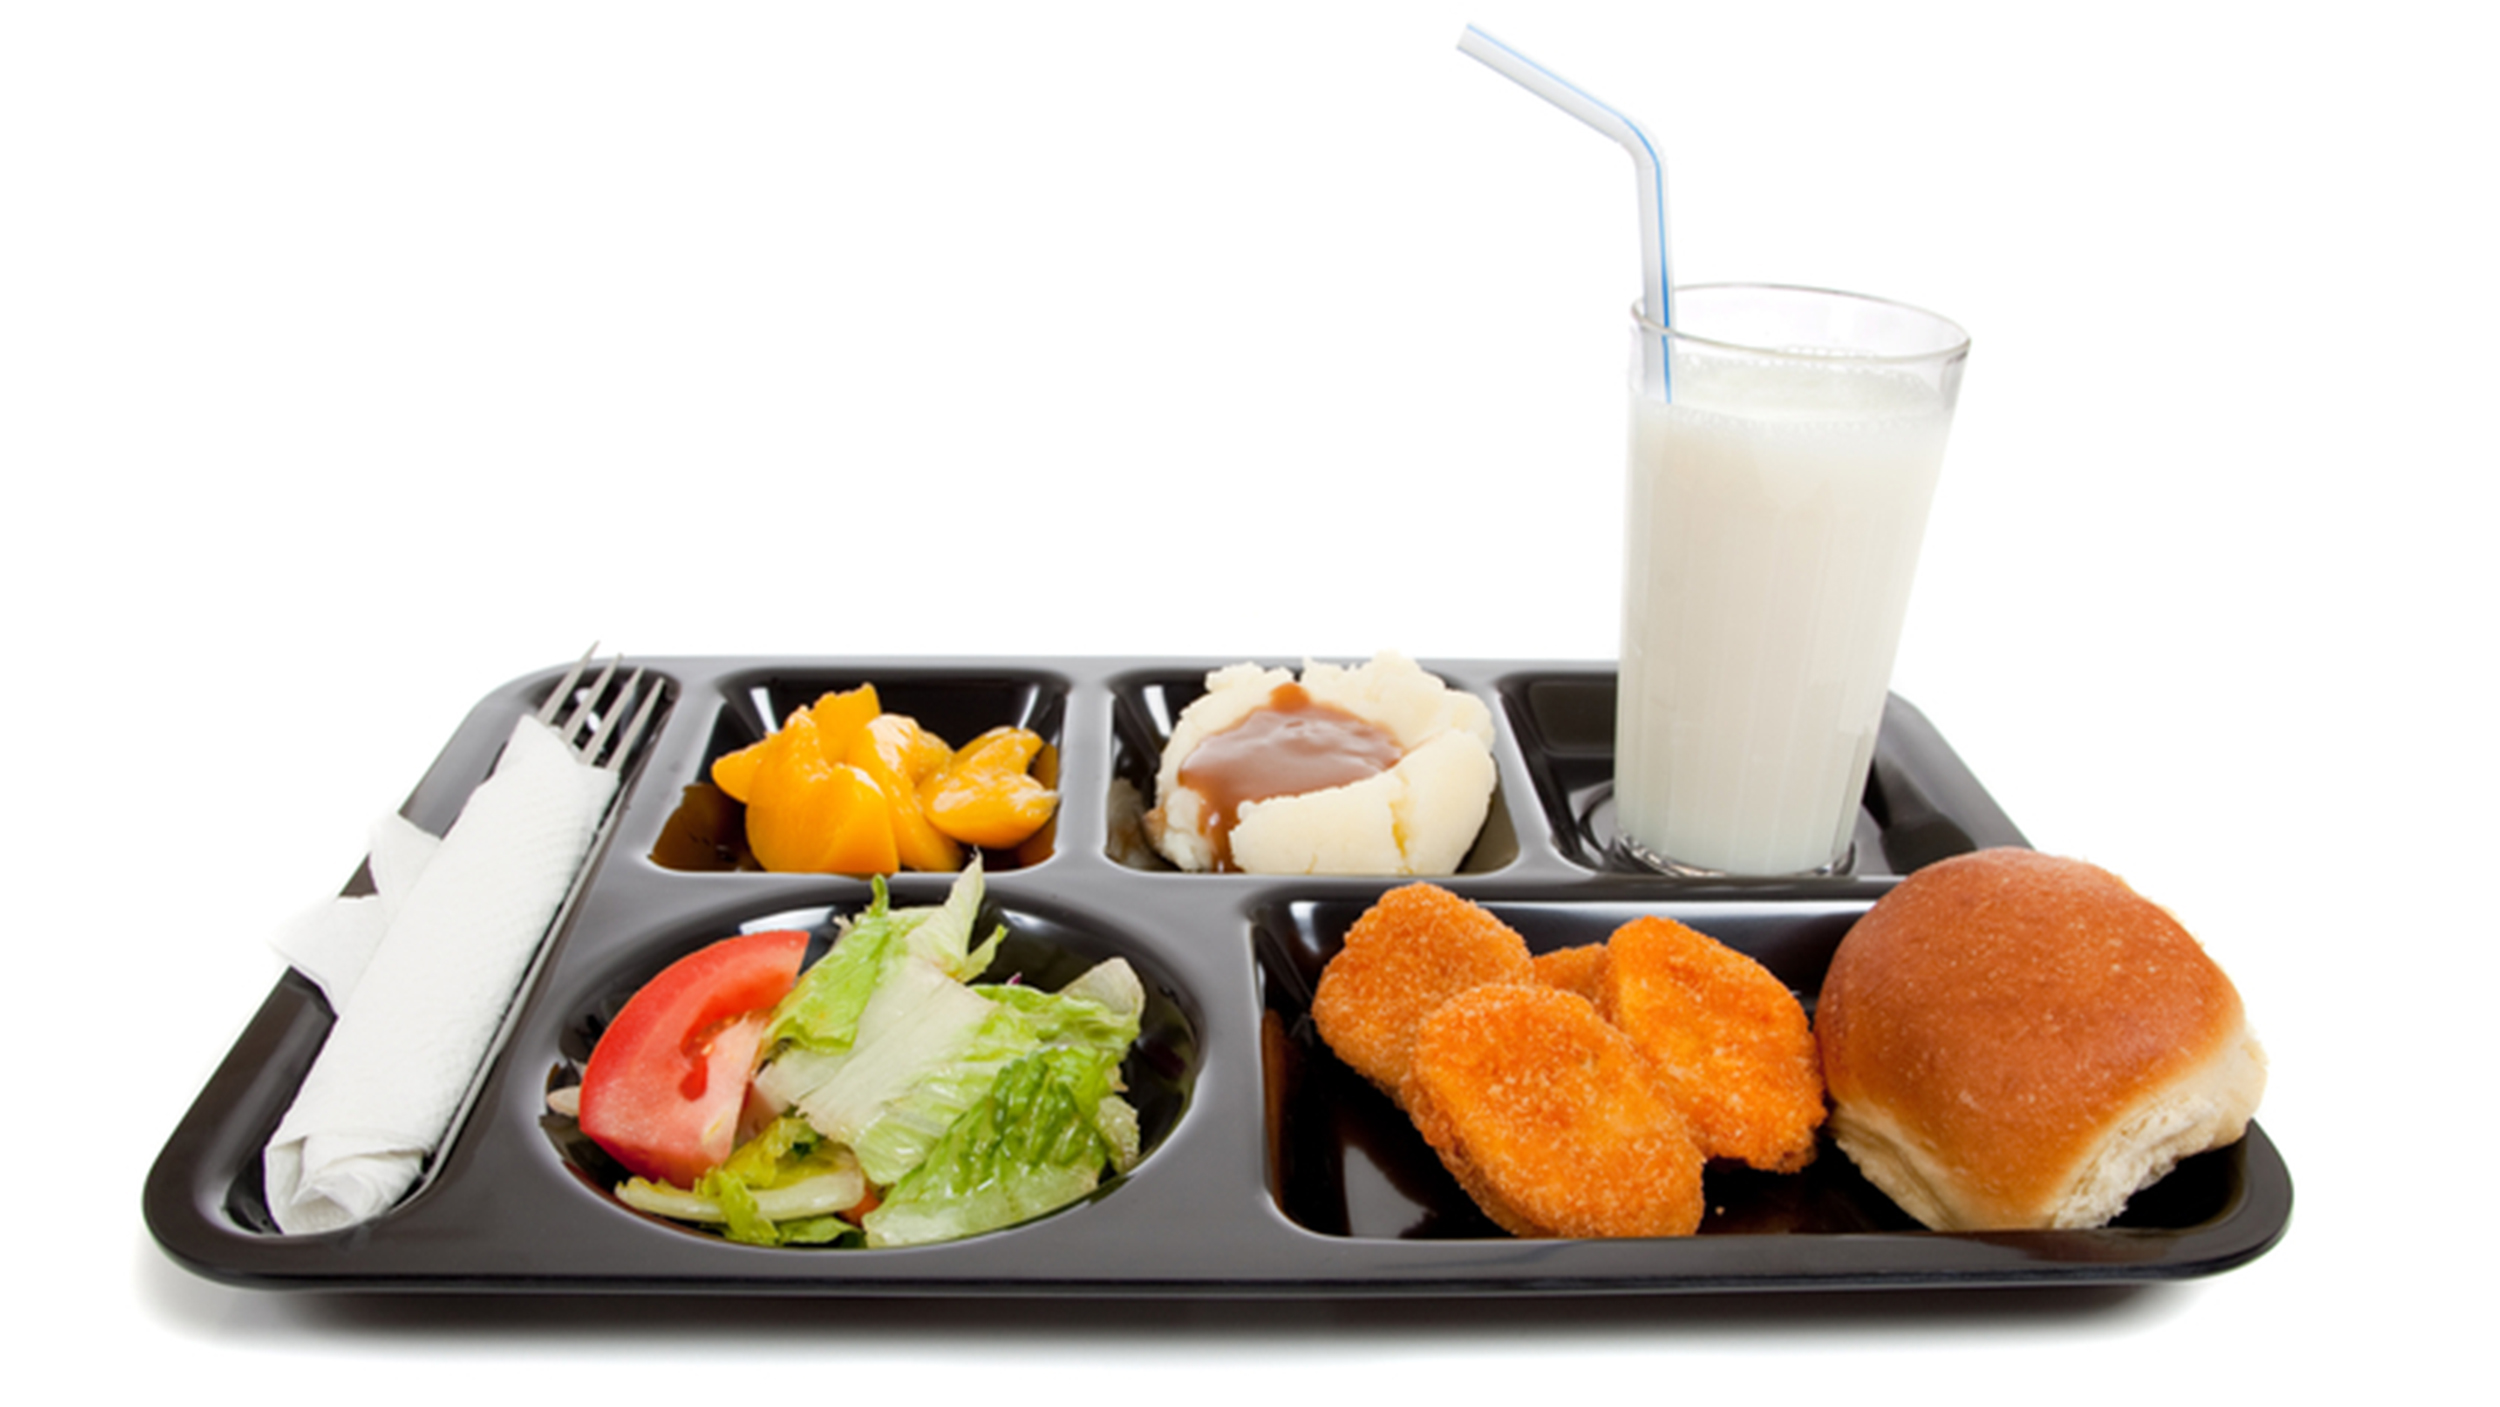 Vegetables hit school lunch trays, but most kids don't bite